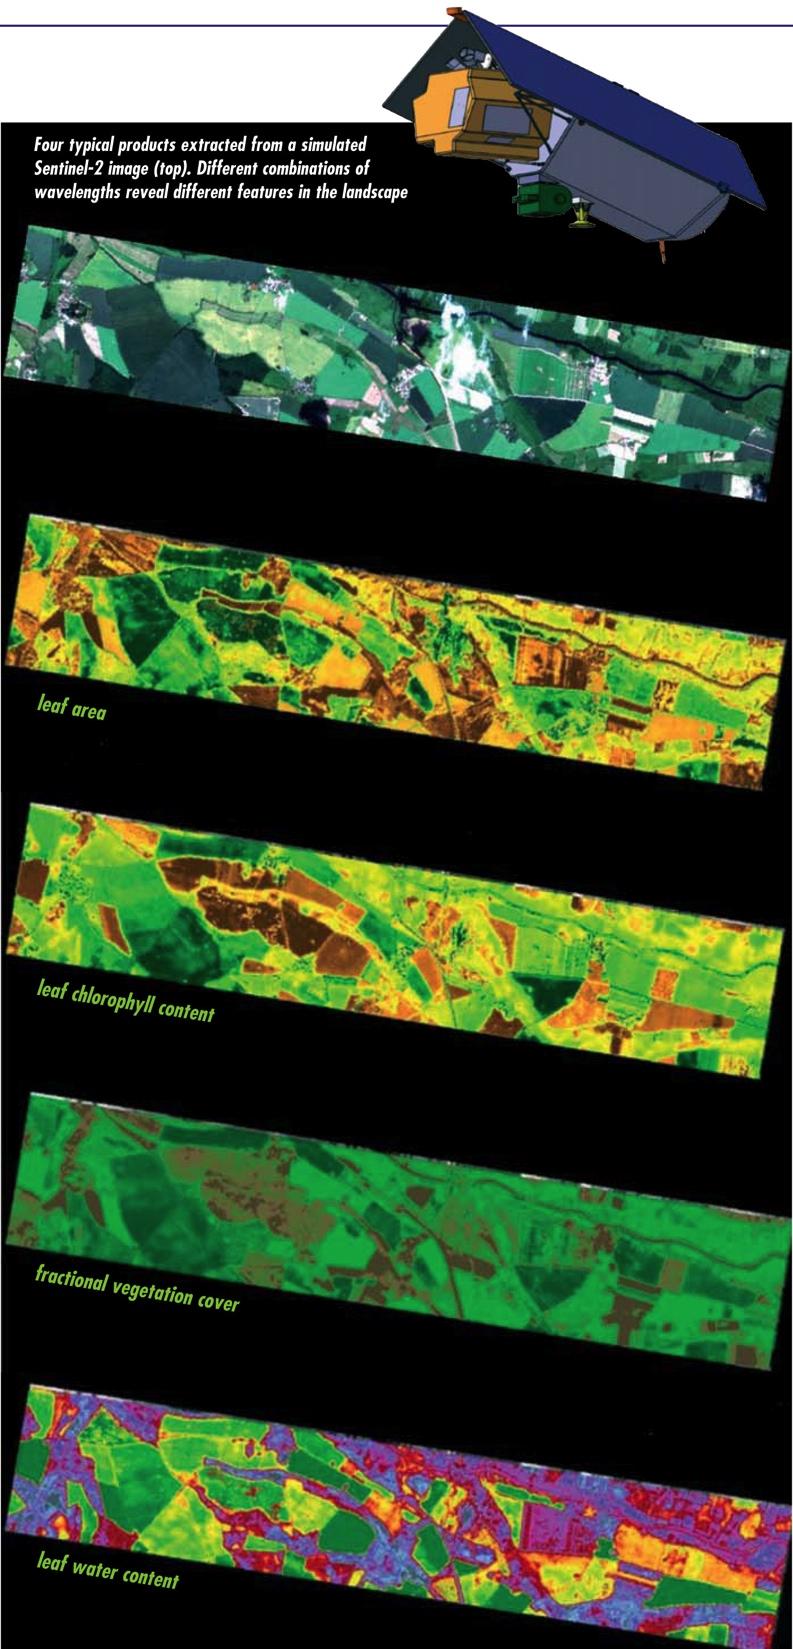 Sentinel-2 applications Agriculture, Forestry and Range!" e.g. discriminating vegetation type & state Land Use/Cover Changes!" e.g. monitoring urban growth Geology!" e.g. mapping geologic landforms Hydrology!